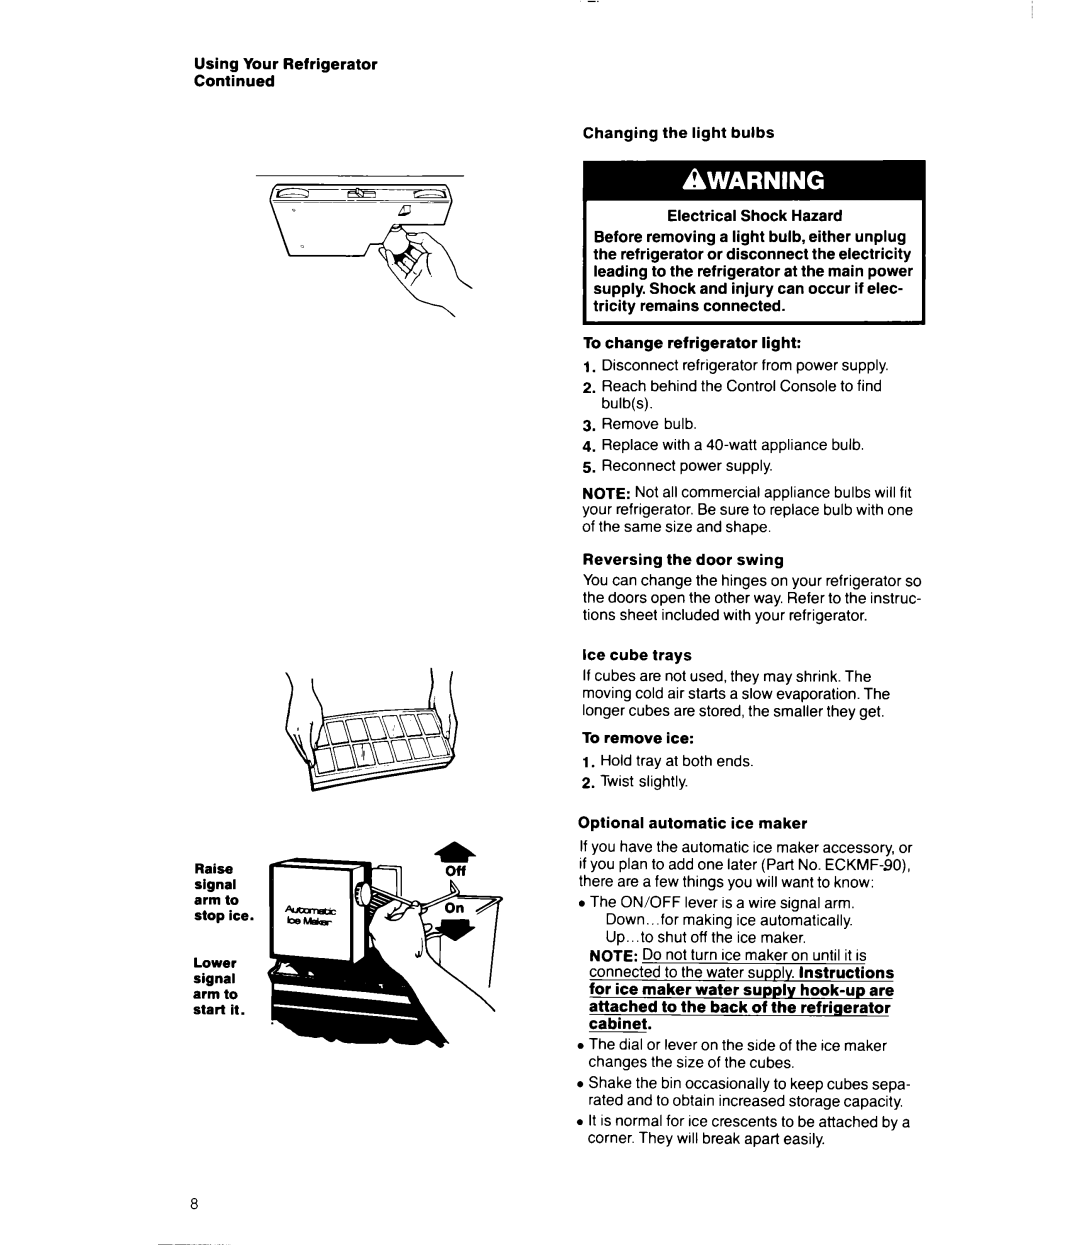 Whirlpool 3Ell8GK manual Using Your Refrigerator Continued 